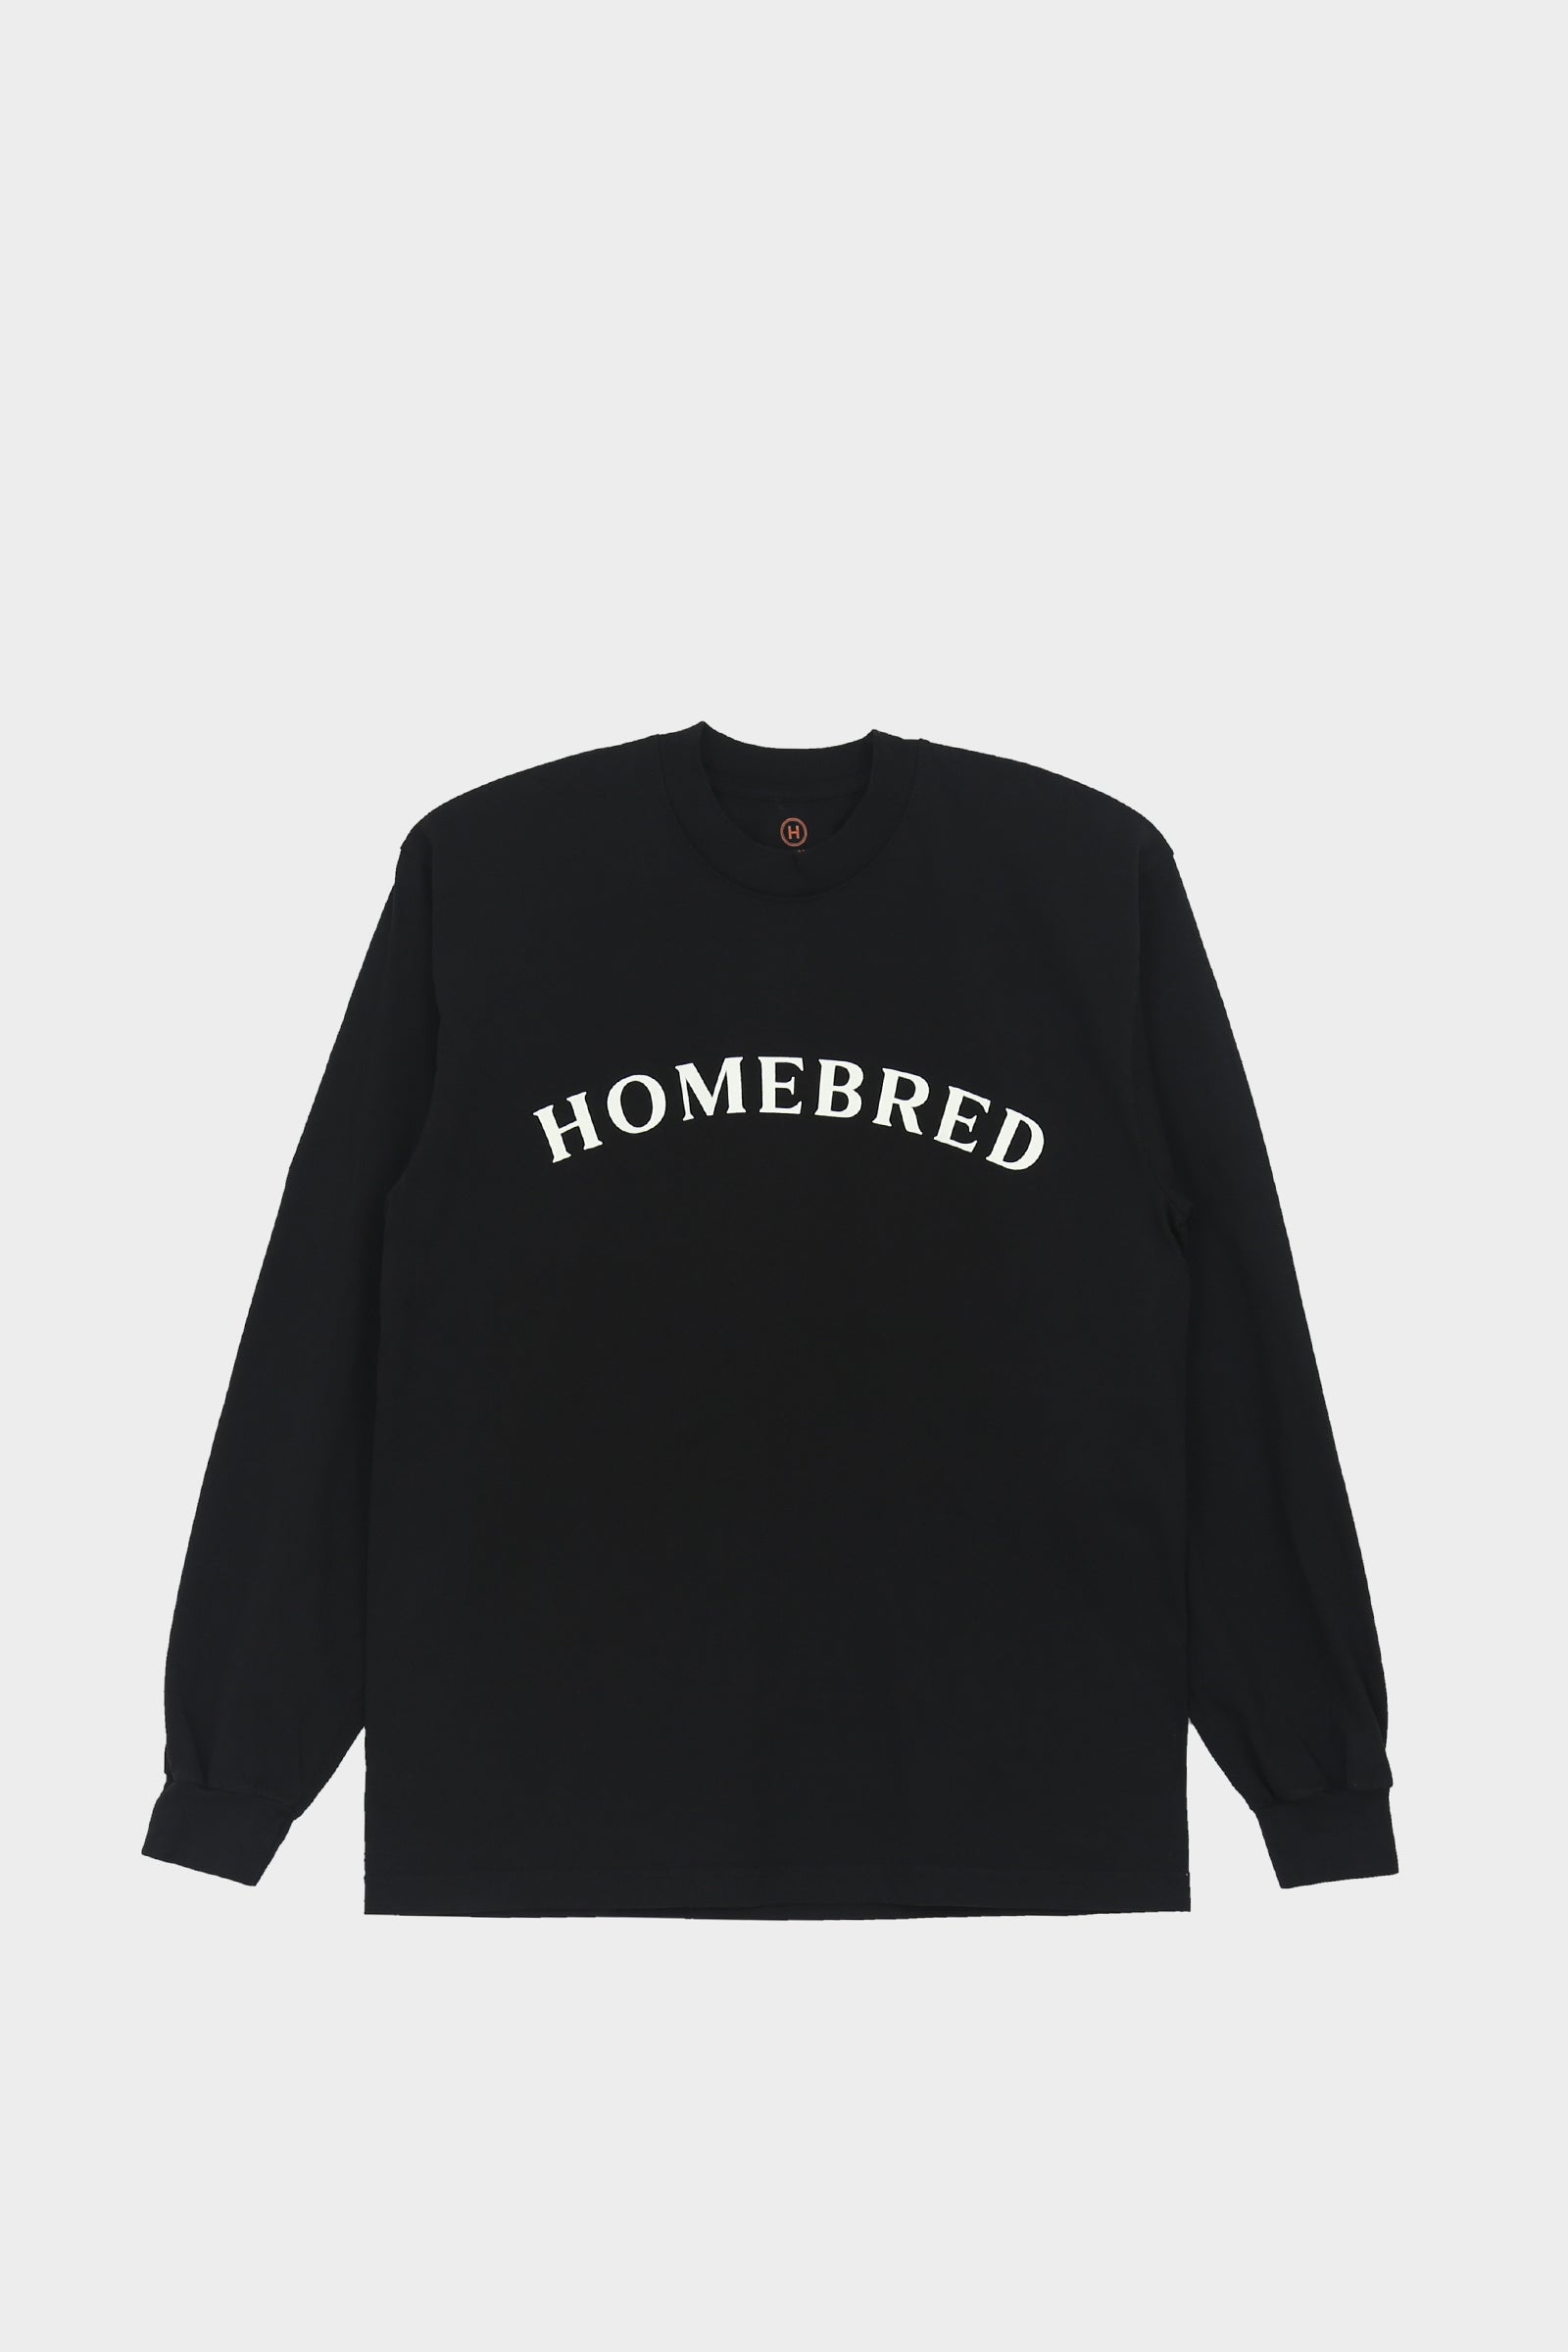 Homebred Arch Long Sleeve T-shirt